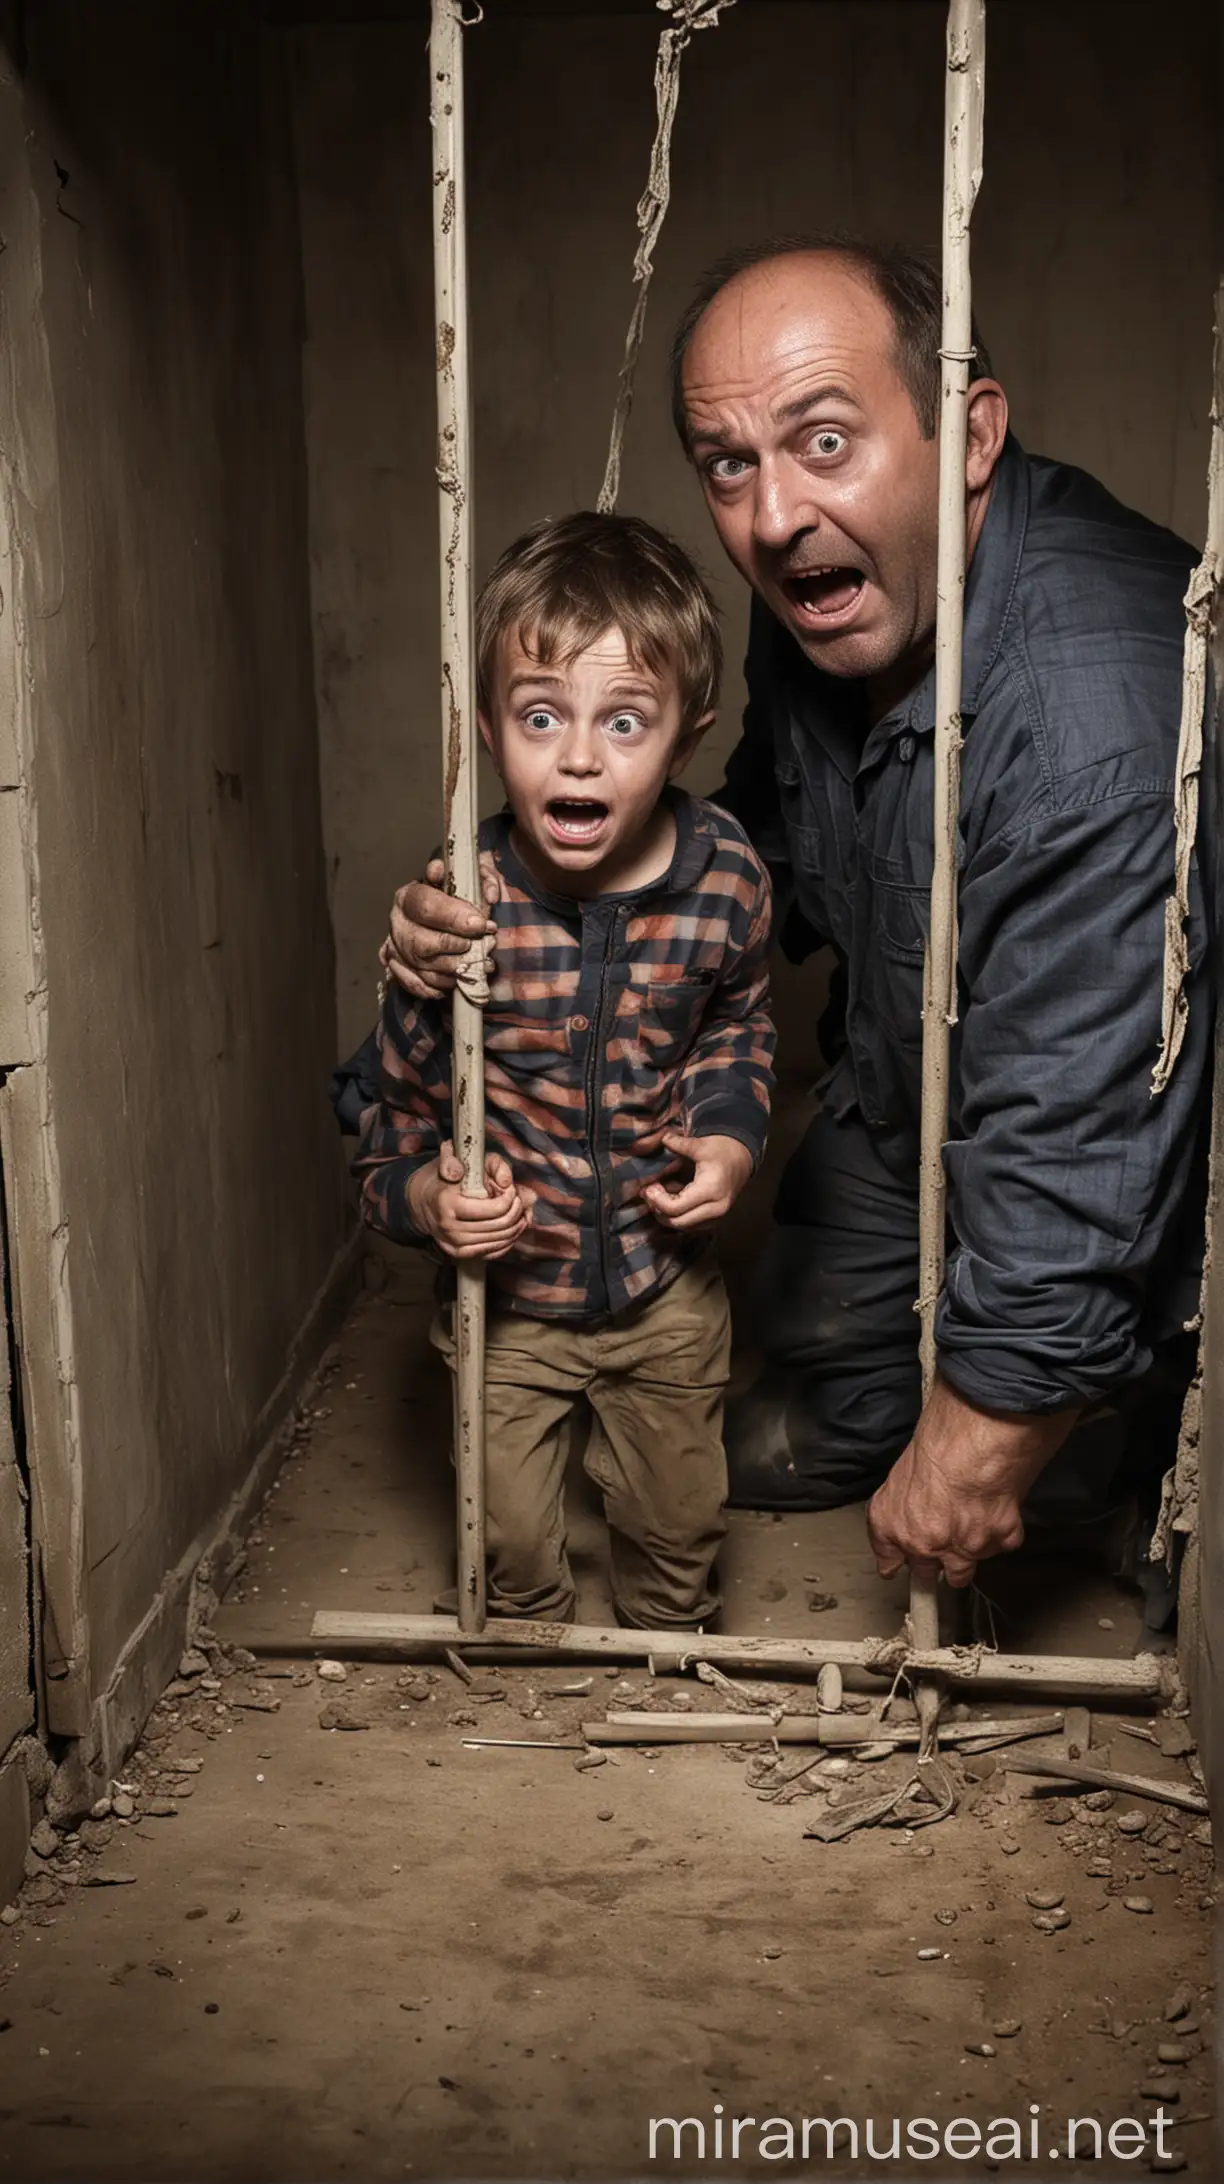 kid being trapped in basemant by a scary man